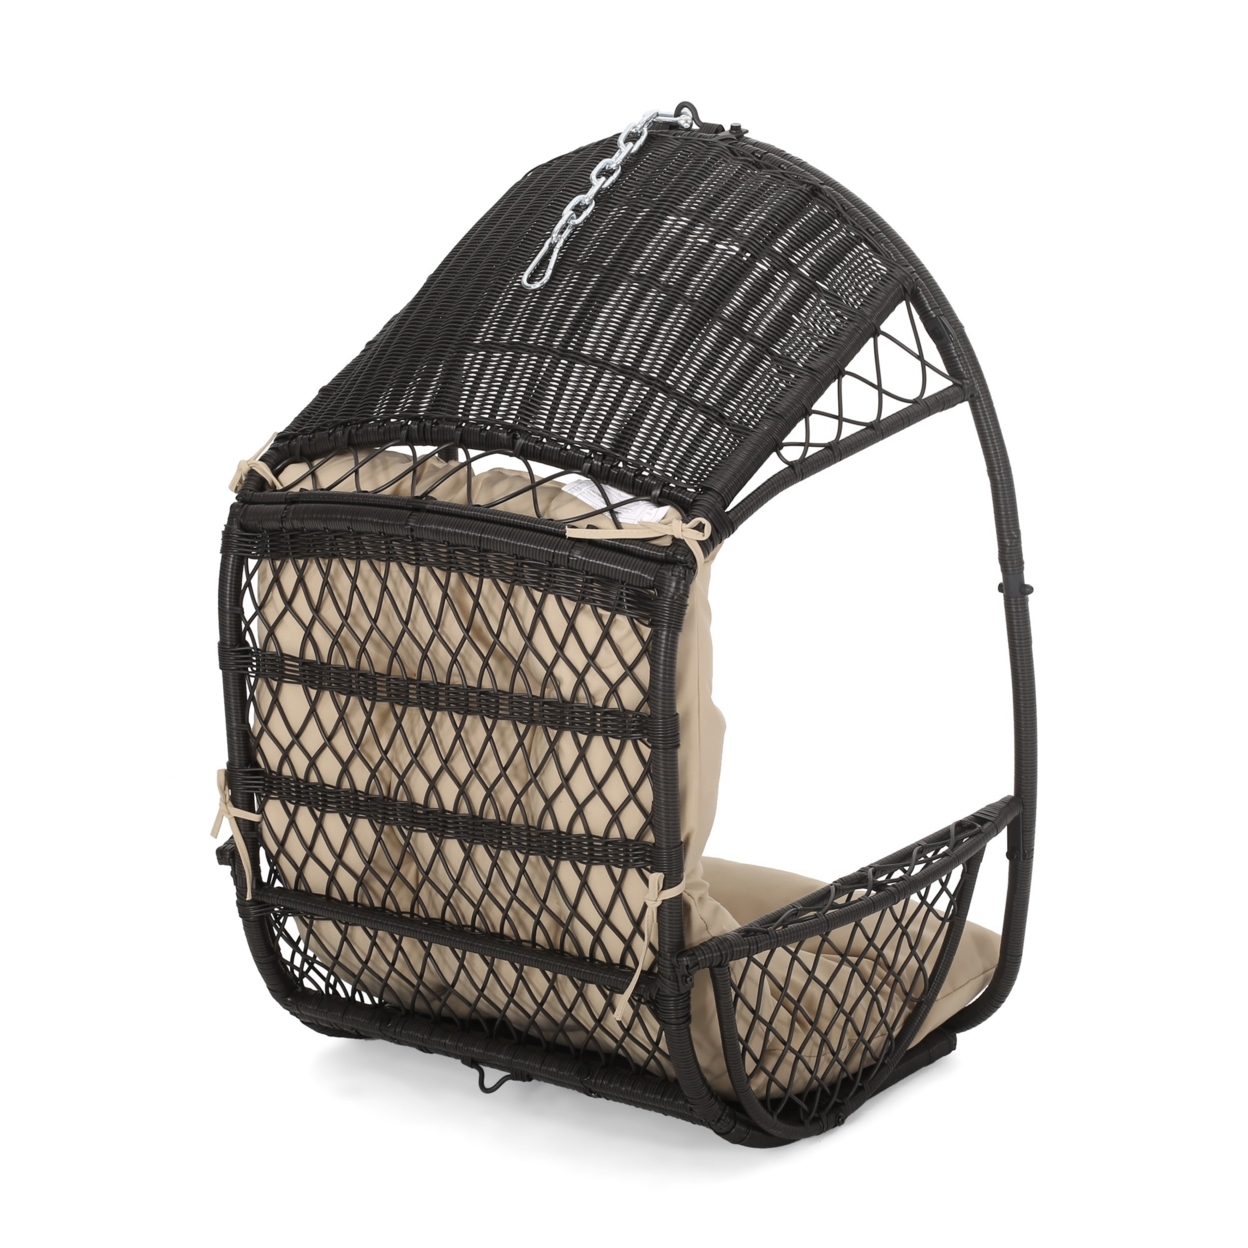 Primo Wicker Hanging Basket Chair (No Stand) - Brown/tan